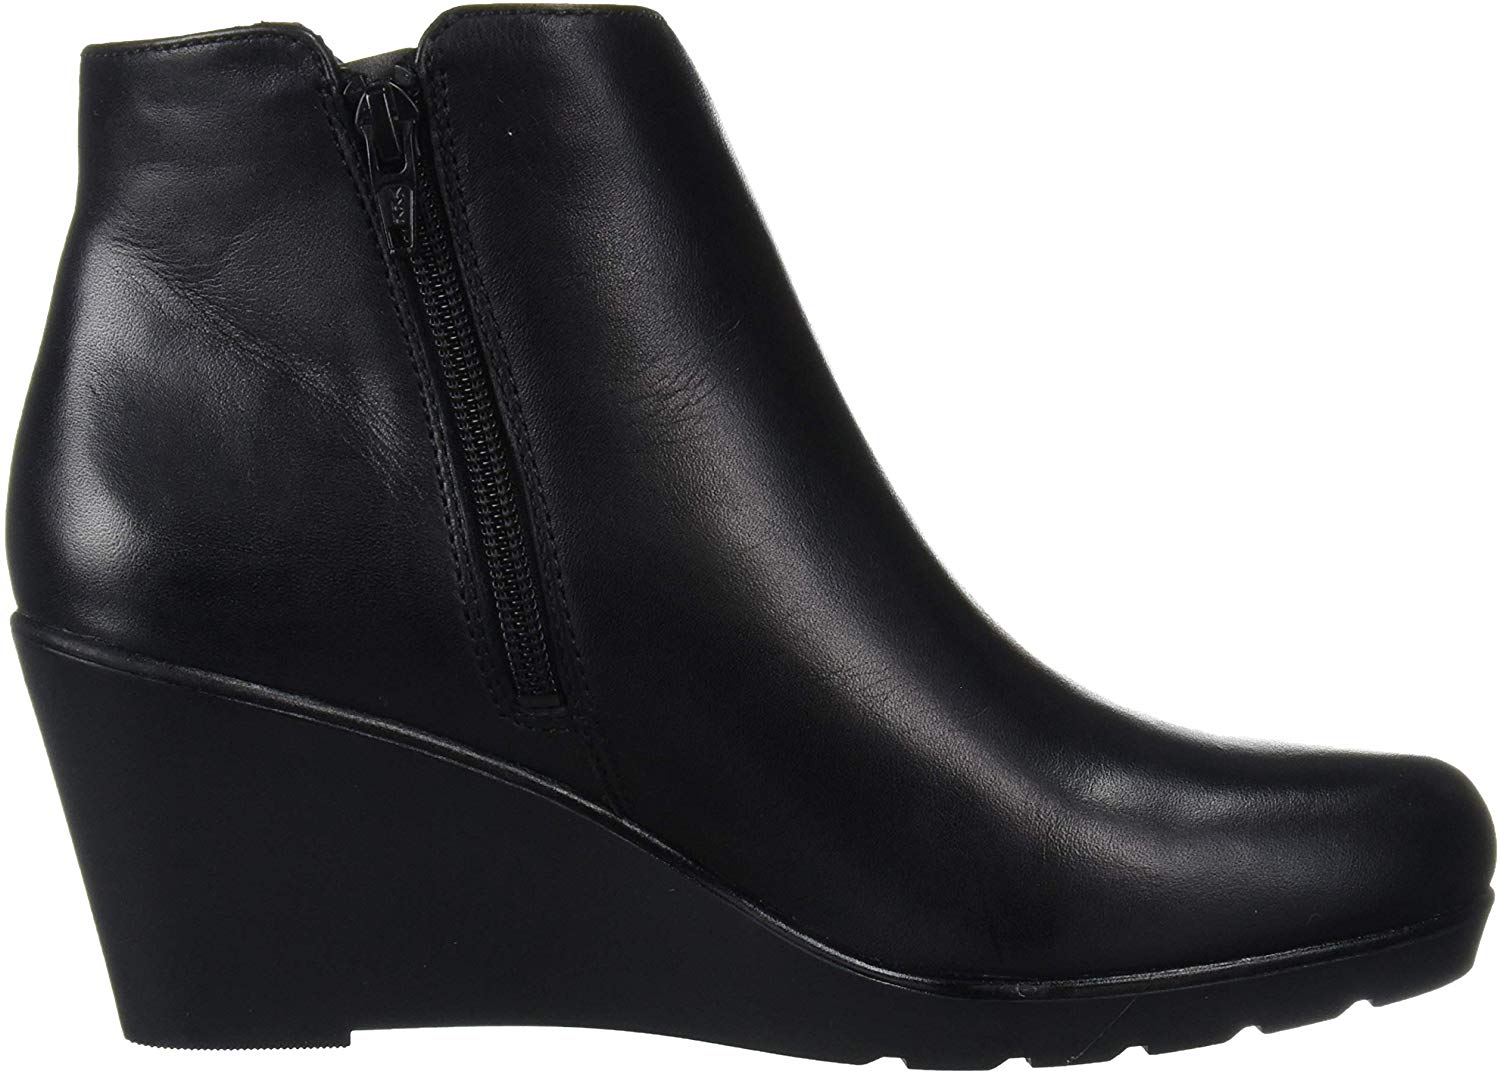 Naturalizer Women's Landry Booties Ankle Boot, Black Leather, Size 9.0